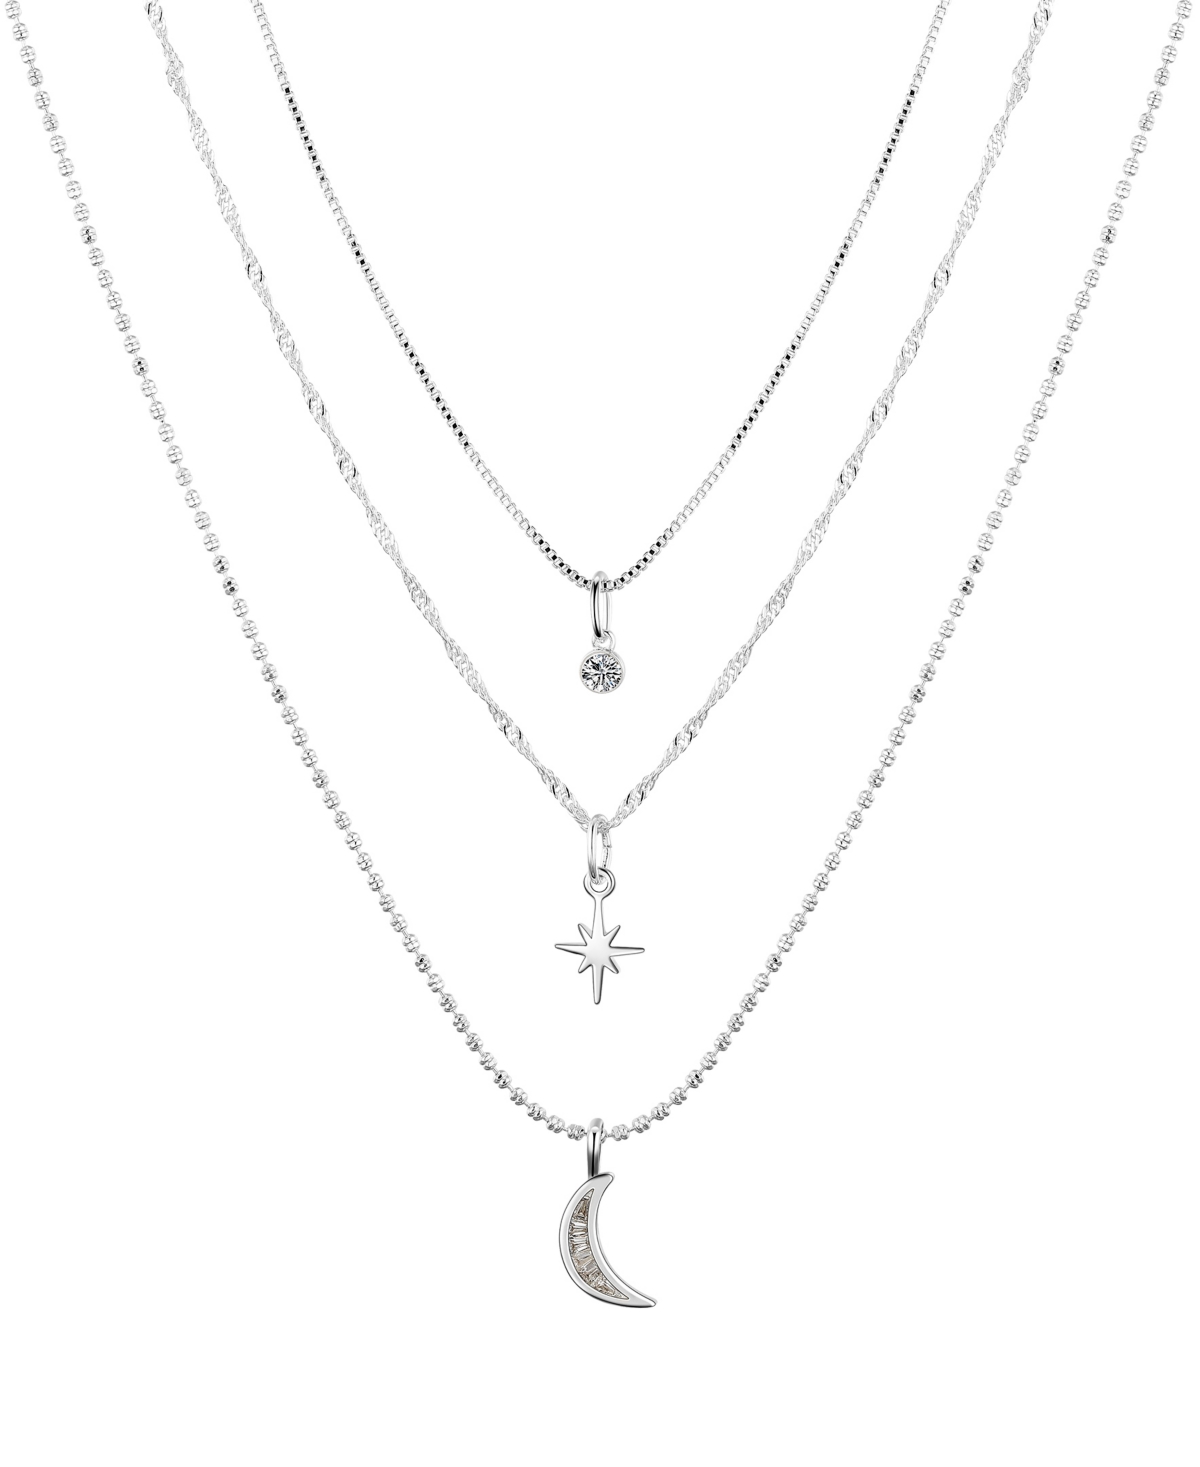 Cubic Zirconia Star Moon Layered 3-Piece Necklace Set - White